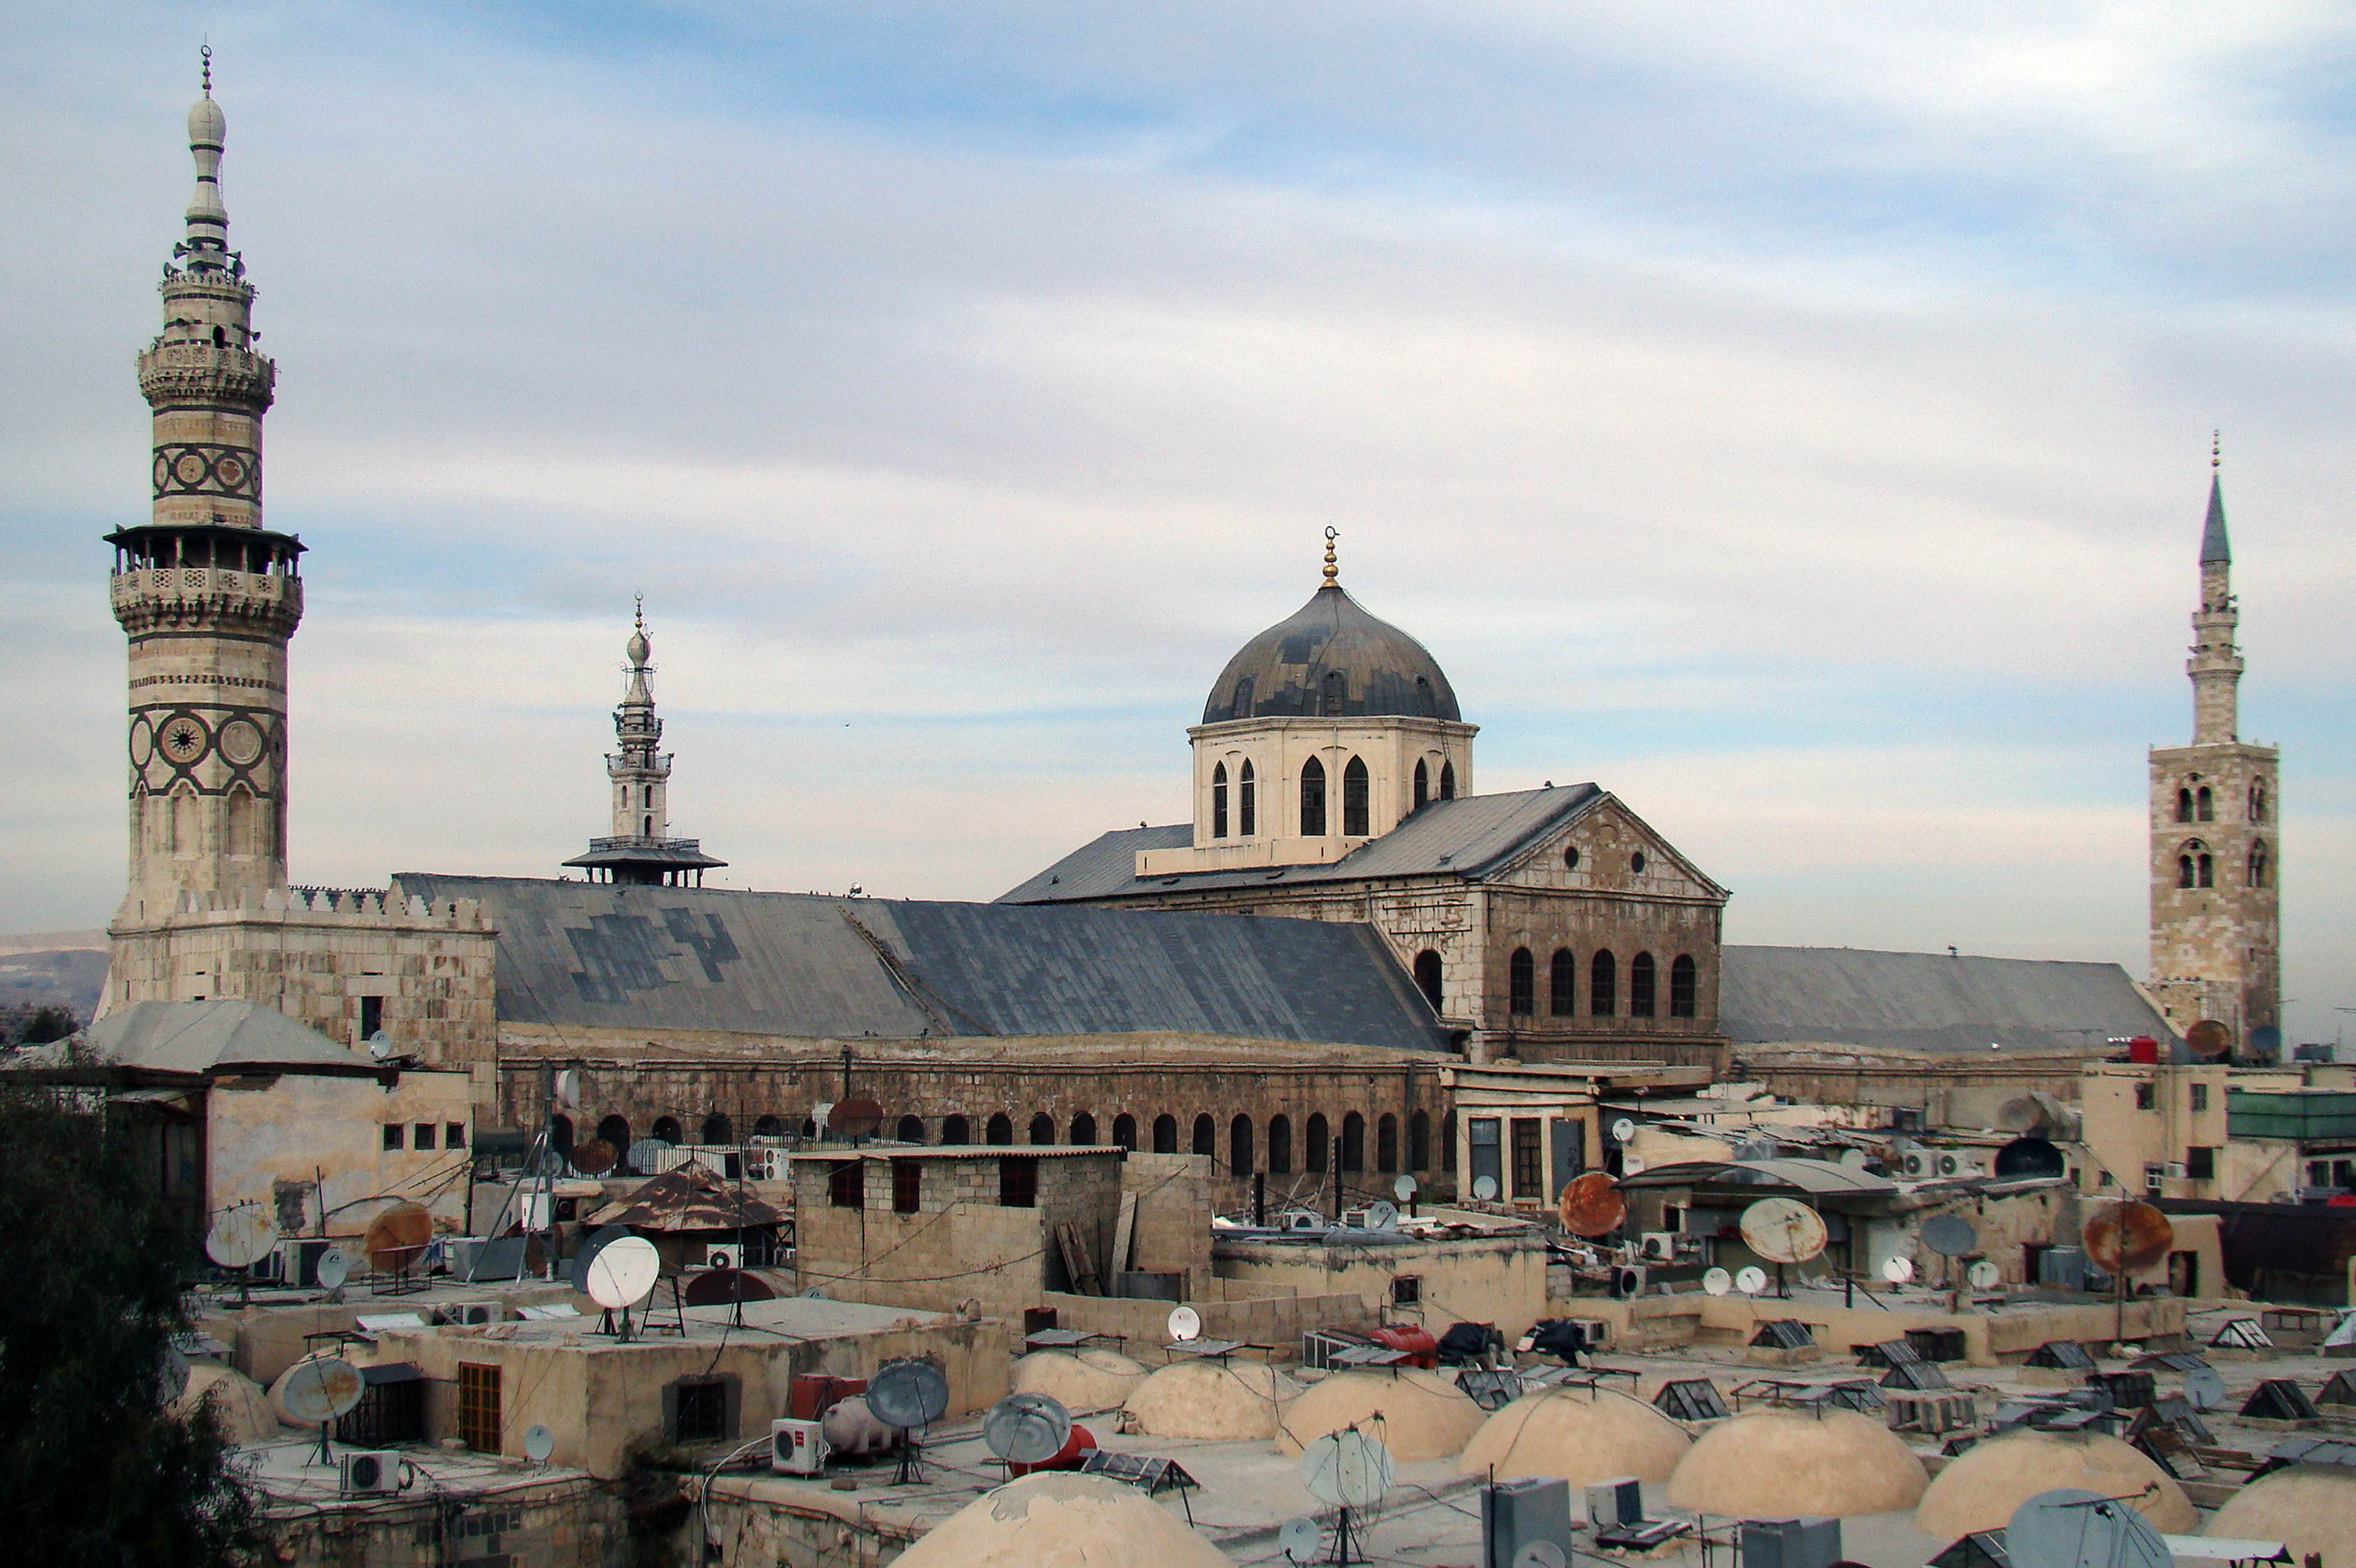 View of the Great Mosque of Damascus in 2008, photo: Ghaylam, CC BY-NC-ND 2.0 https://flic.kr/p/5HiroJ